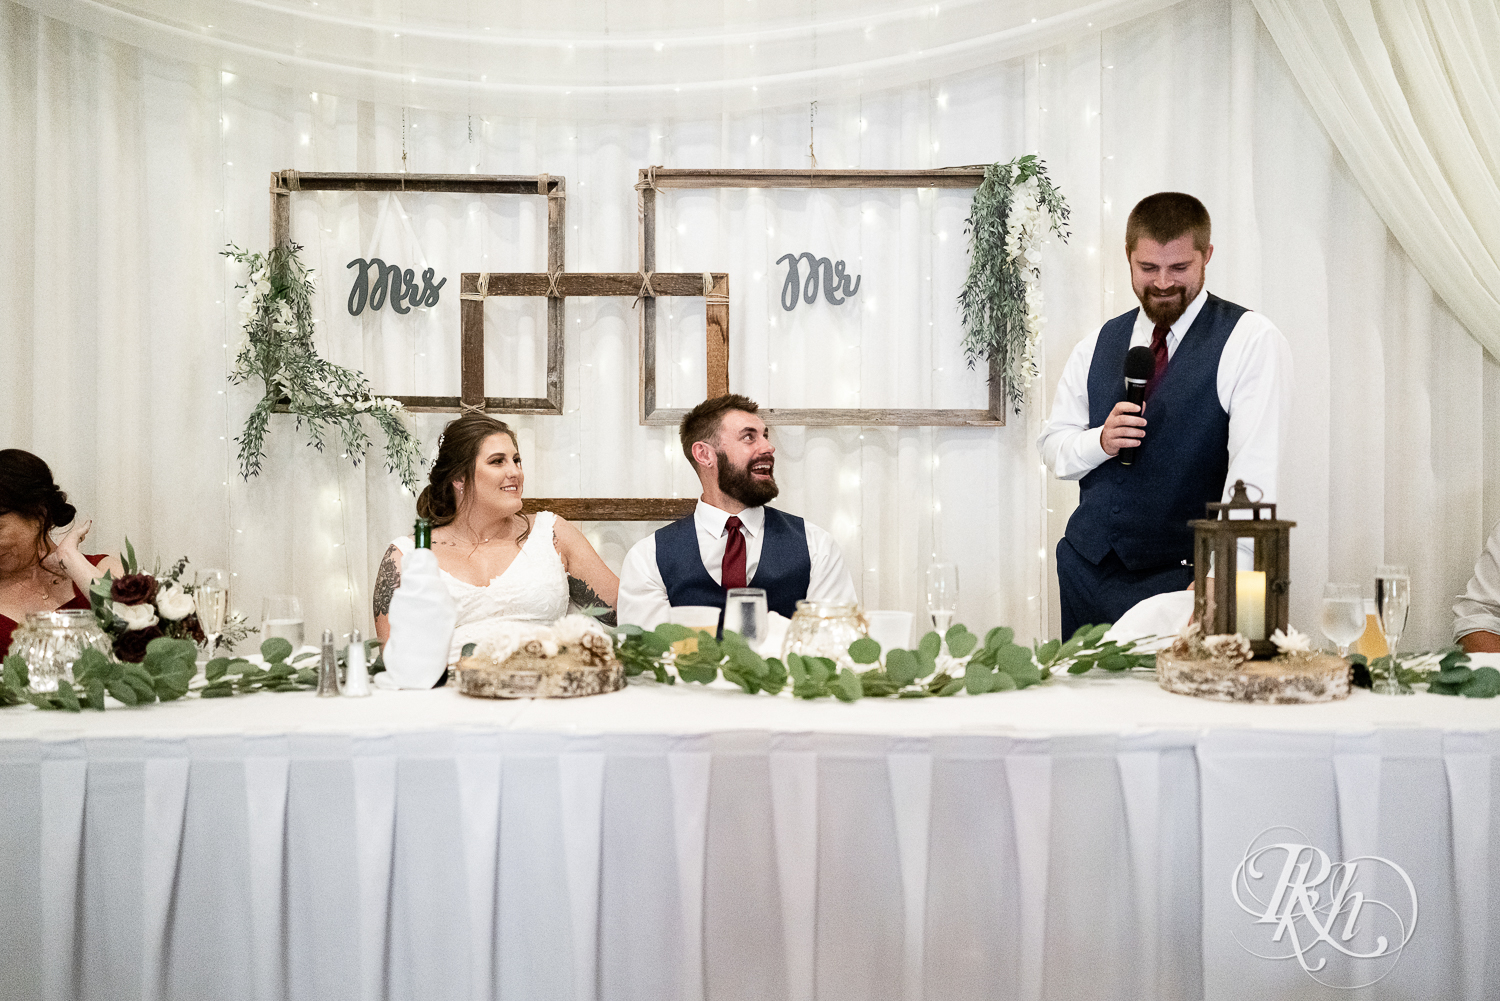 Bride and groom laugh during wedding speeches at Pine Peaks Event Center in Pine River, Minnesota.